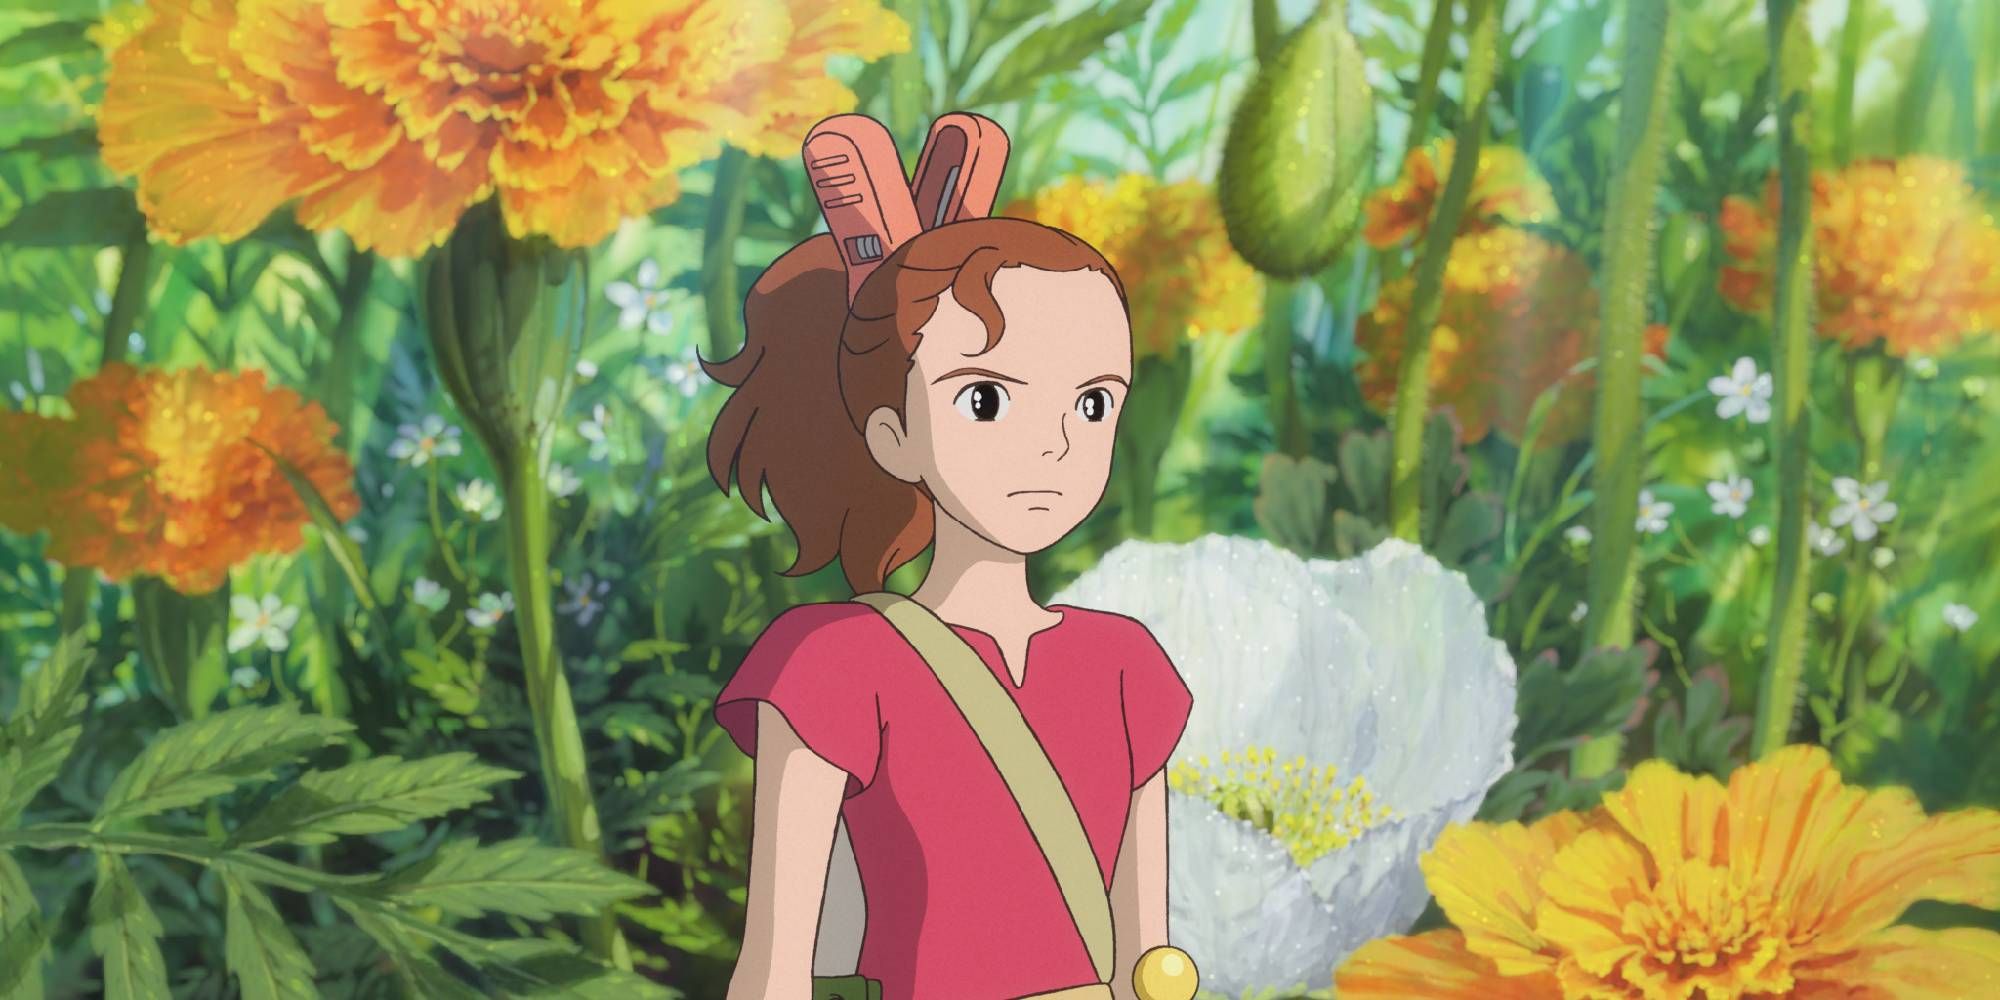 A shot of Arrietty with giant flowers in the background in The Secret World of Arrietty